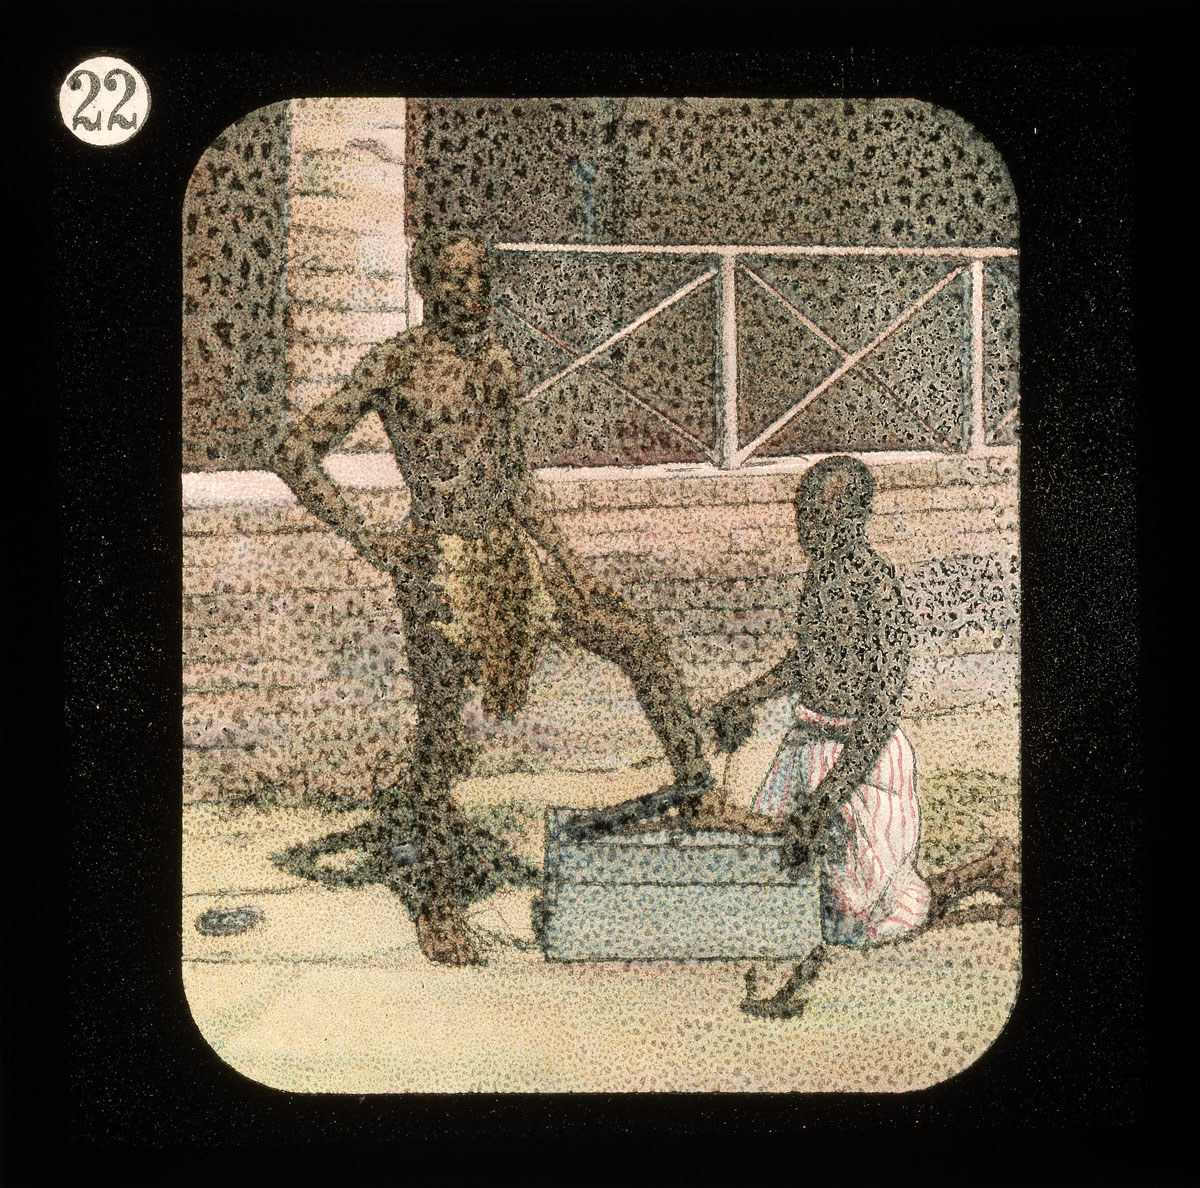 'Liberating a Slave.' Image from Lantern Slides of the Life, Adventures, and Work of David Livingstone, Date Unknown: [22]. Image courtesy of the Smithsonian Libraries, Washington, D.C